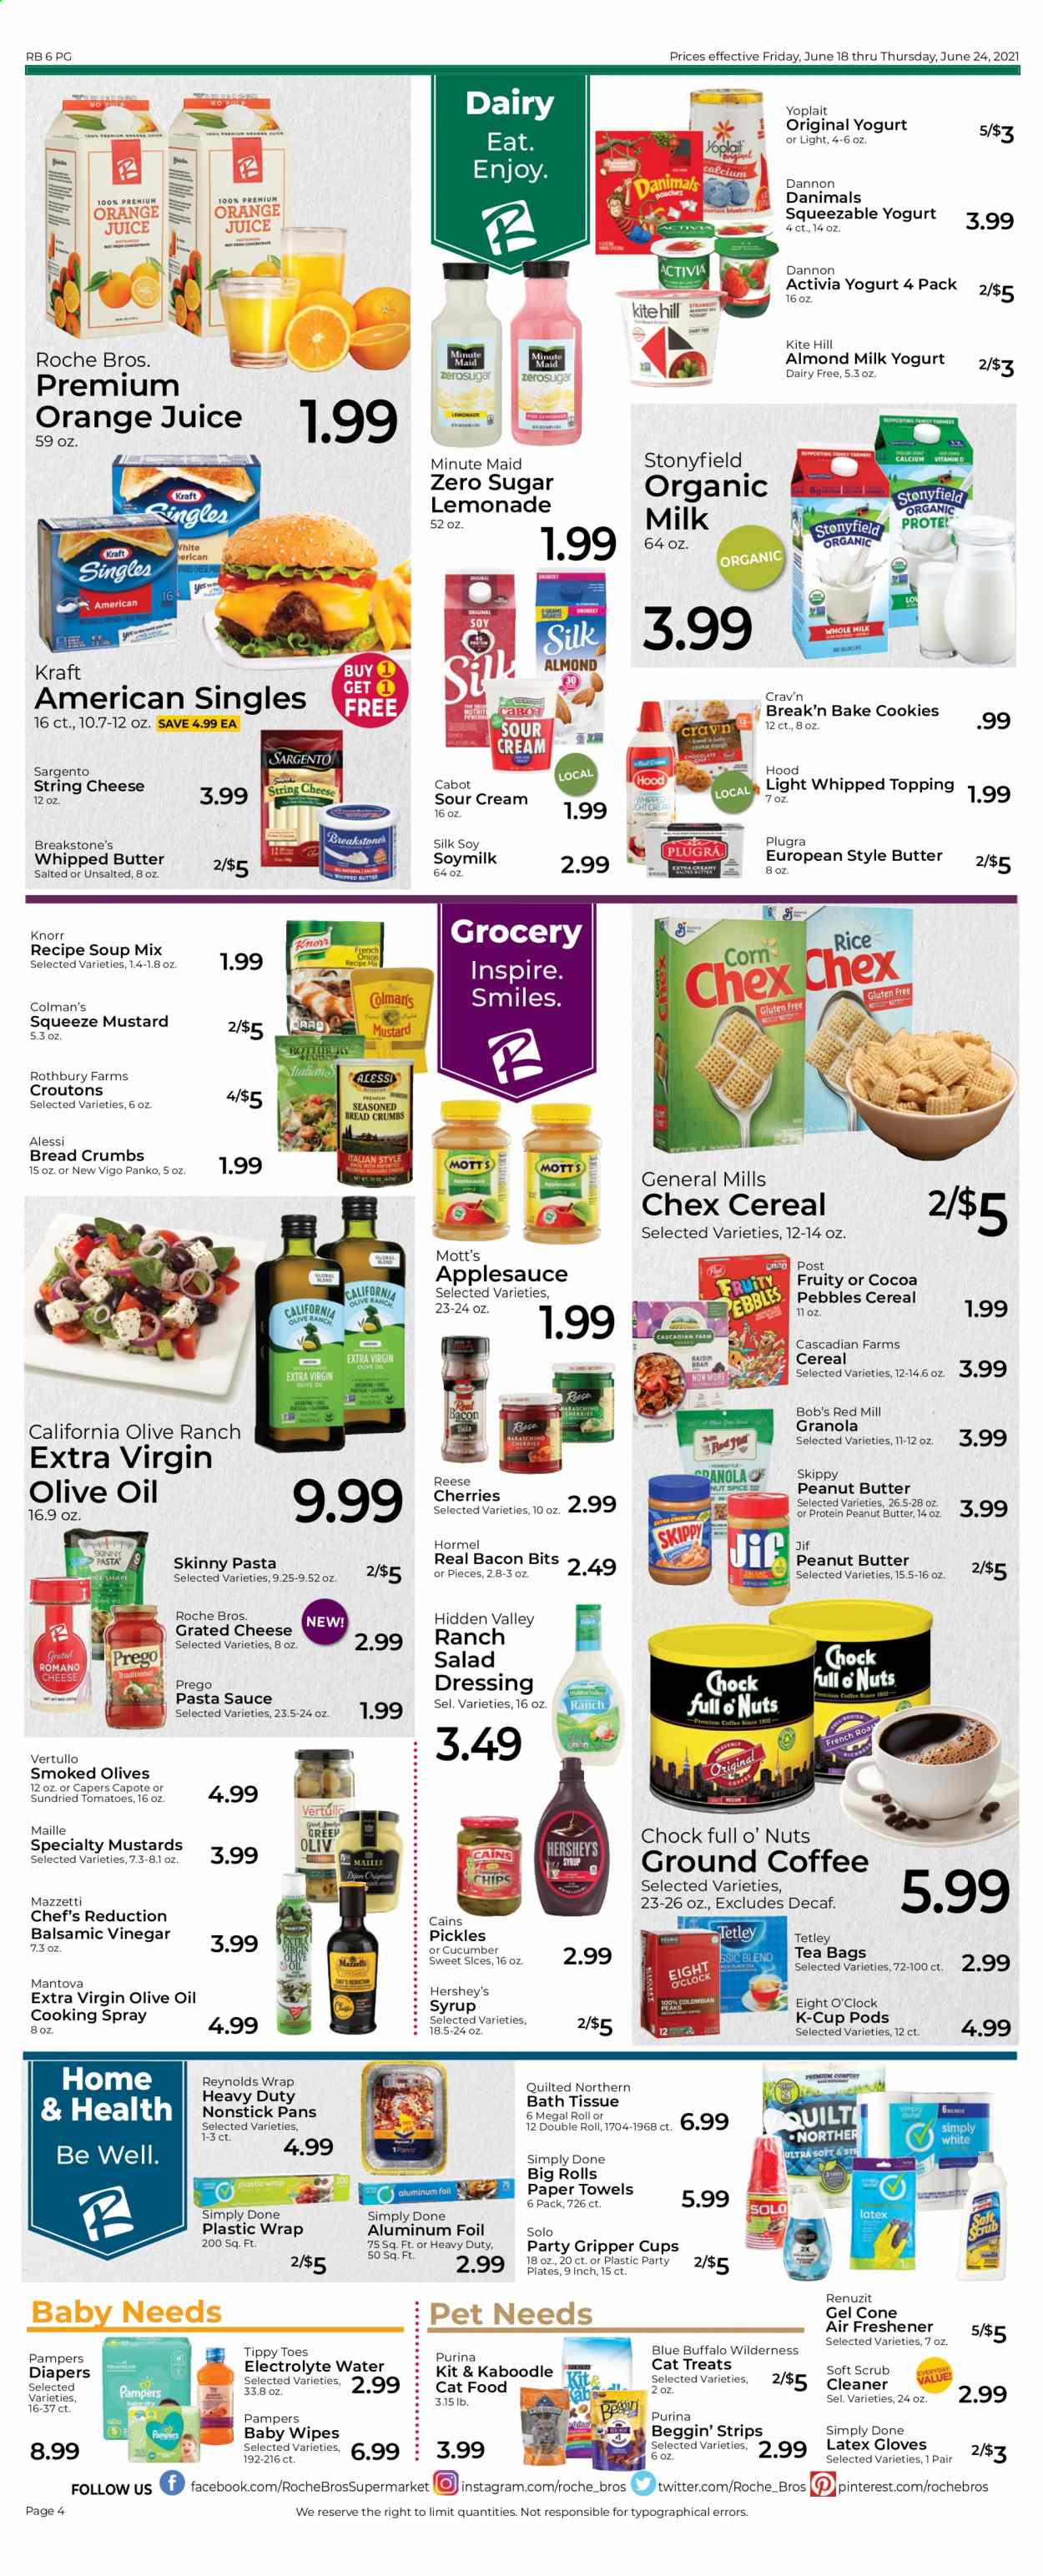 thumbnail - Roche Bros. Flyer - 06/18/2021 - 06/24/2021 - Sales products - panko breadcrumbs, cherries, Mott's, pasta sauce, soup mix, soup, Knorr, sauce, Kraft®, Hormel, string cheese, grated cheese, Sargento, yoghurt, Activia, Yoplait, Dannon, Danimals, almond milk, soy milk, organic milk, Silk, whipped butter, sour cream, Hershey's, strips, cookies, croutons, topping, bacon bits, capers, dried tomatoes, pickles, olives, cereals, granola, mustard, salad dressing, dressing, balsamic vinegar, cooking spray, extra virgin olive oil, vinegar, olive oil, apple sauce, peanut butter, syrup, Jif, lemonade, orange juice, juice, fruit punch, tea bags, coffee, ground coffee, coffee capsules, K-Cups, Eight O'Clock, wipes, Pampers, baby wipes, nappies, bath tissue, Quilted Northern, kitchen towels, paper towels, cleaner, animal food, Blue Buffalo, cat food, Purina, Beggin'. Page 4.